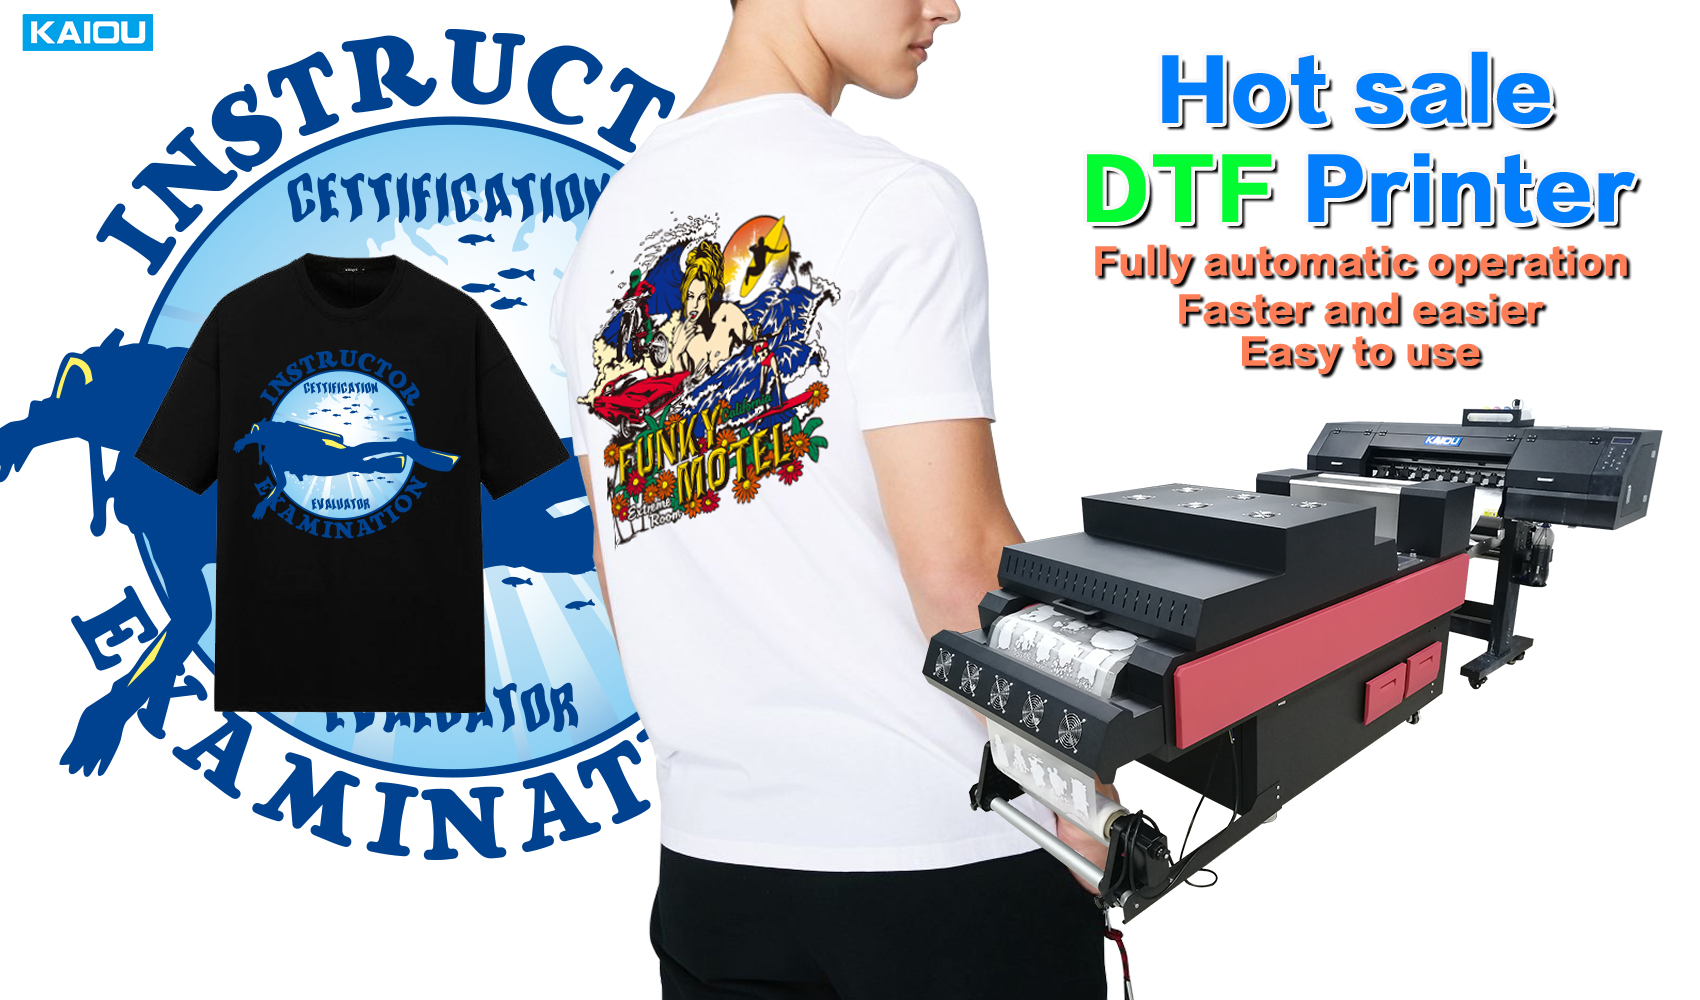 What are the precautions for DTF printer cleaning